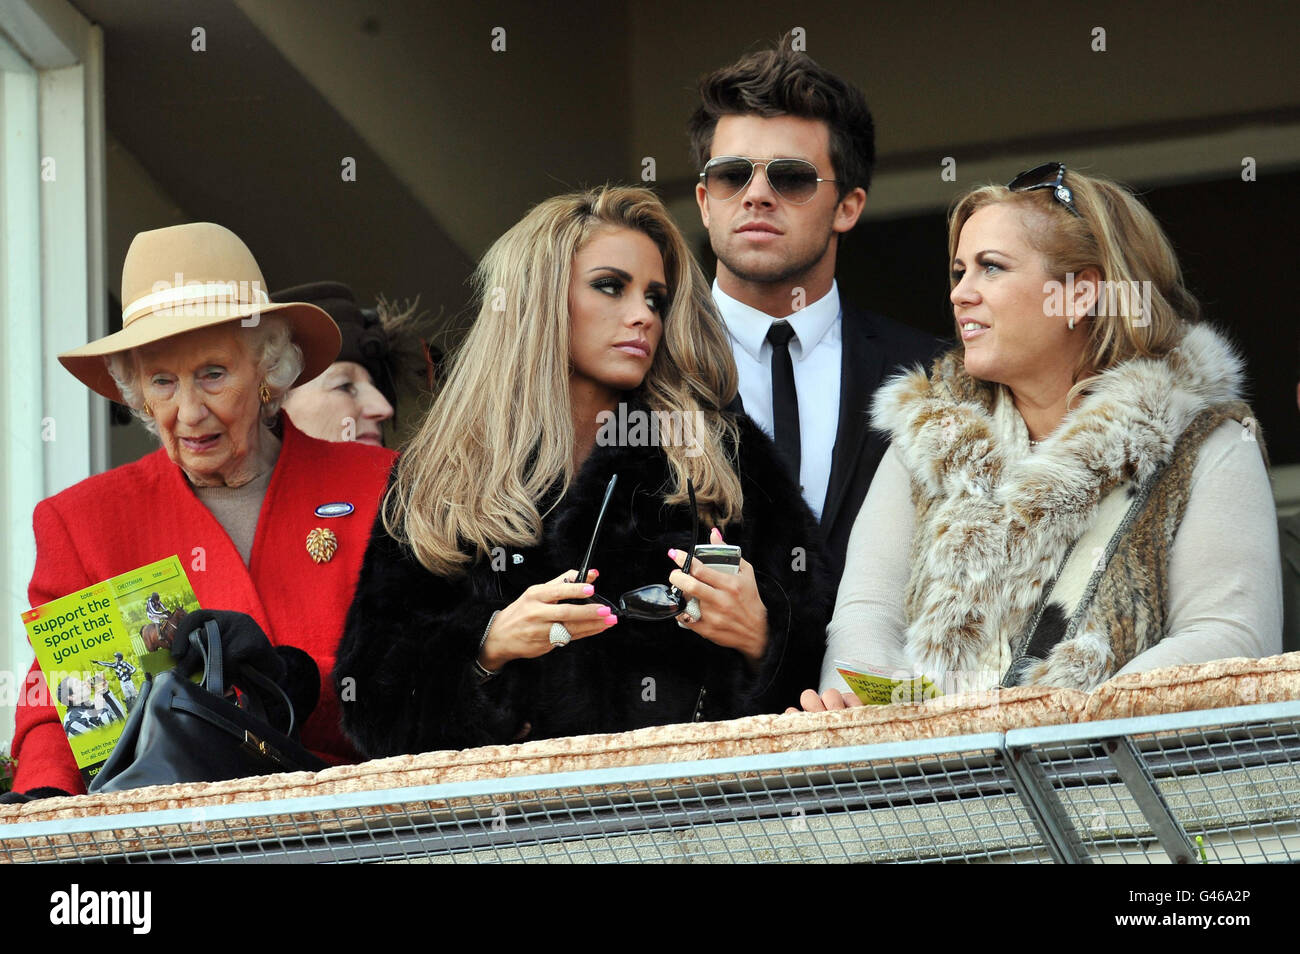 Horse Racing - 2011 Cheltenham Festival - Day Four. Katie Price (centre) with her boyfriend Leandro Penna in the Royal Box during the Gold Cup Day at Cheltenham Racecourse. Stock Photo